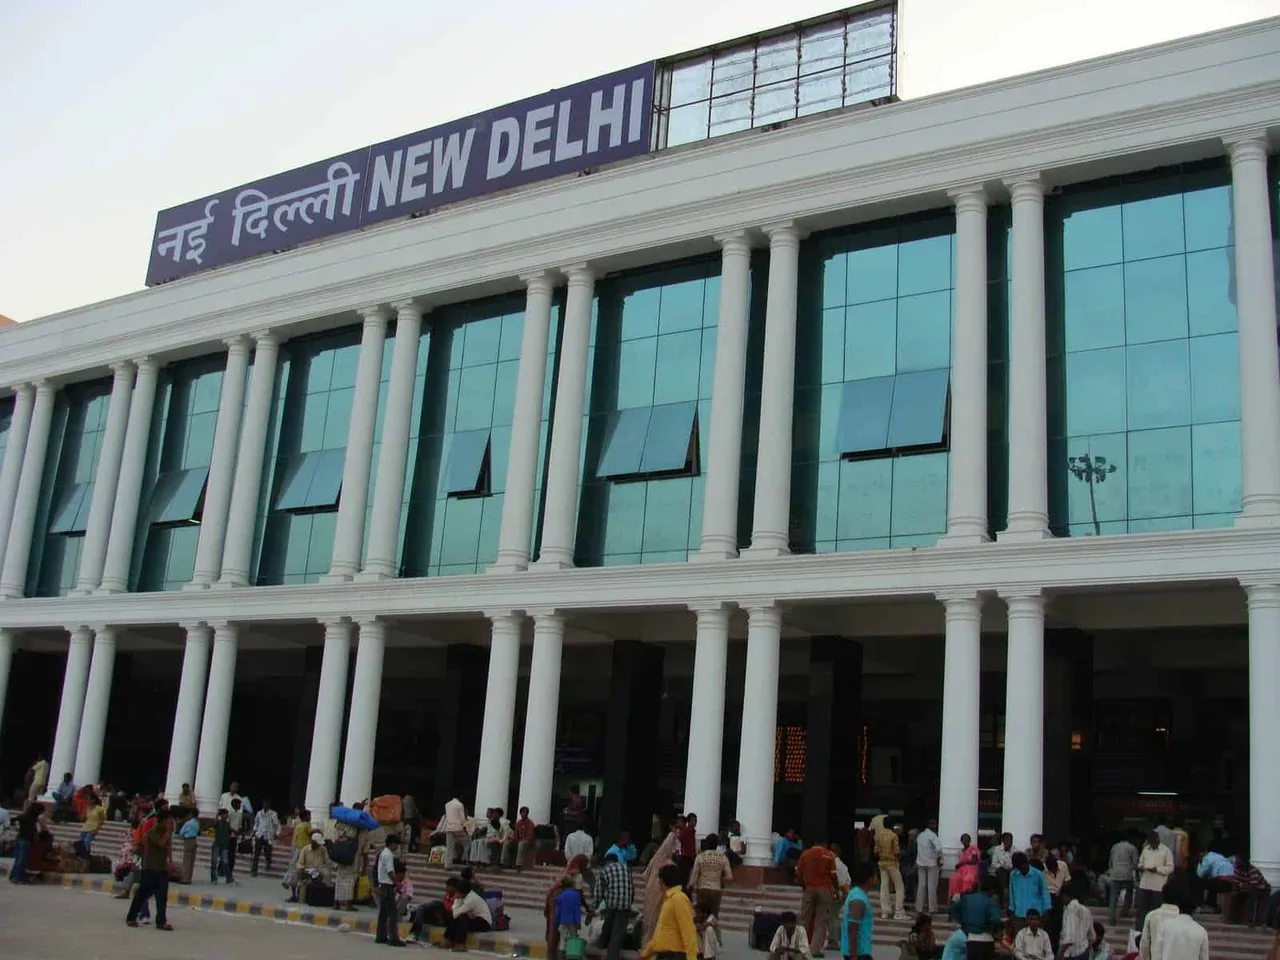 Wi-Fi service launched at New Delhi railway station